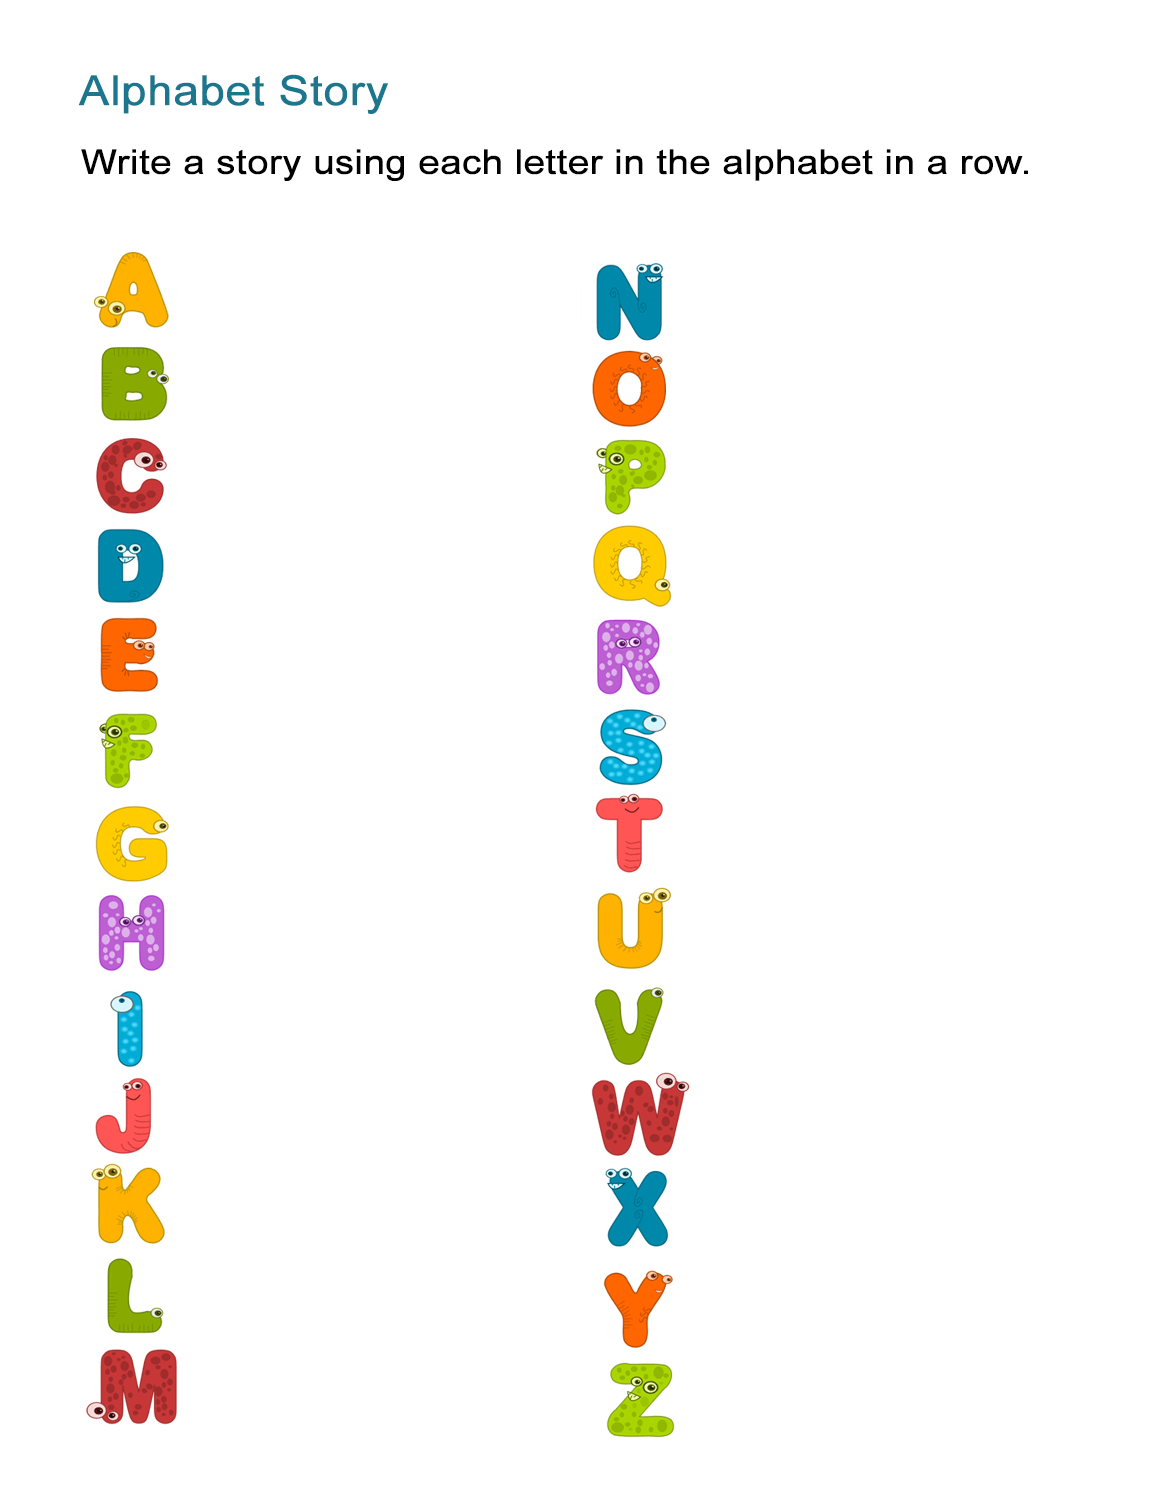 Alphabet Story Worksheet: Create A Story From A To Z - All Esl with regard to Alphabet Stories Worksheets